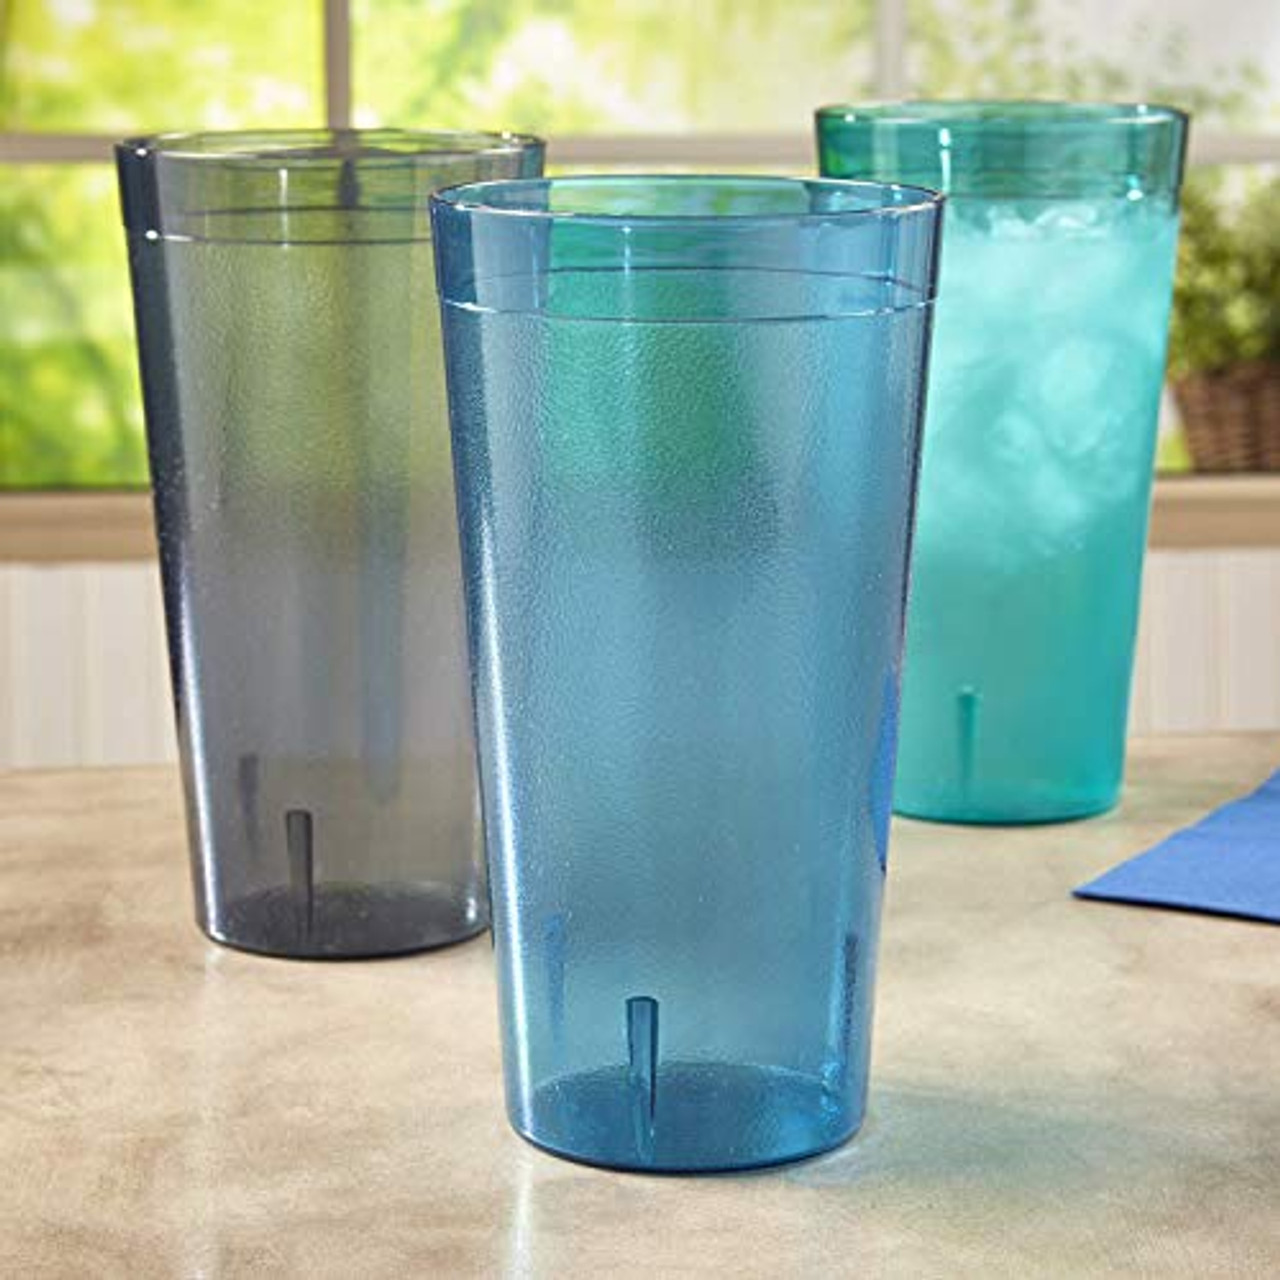 Caf 32-Ounce Plastic Restaurant Style Tumblers | Set of 12 in 4 Assorted Colors